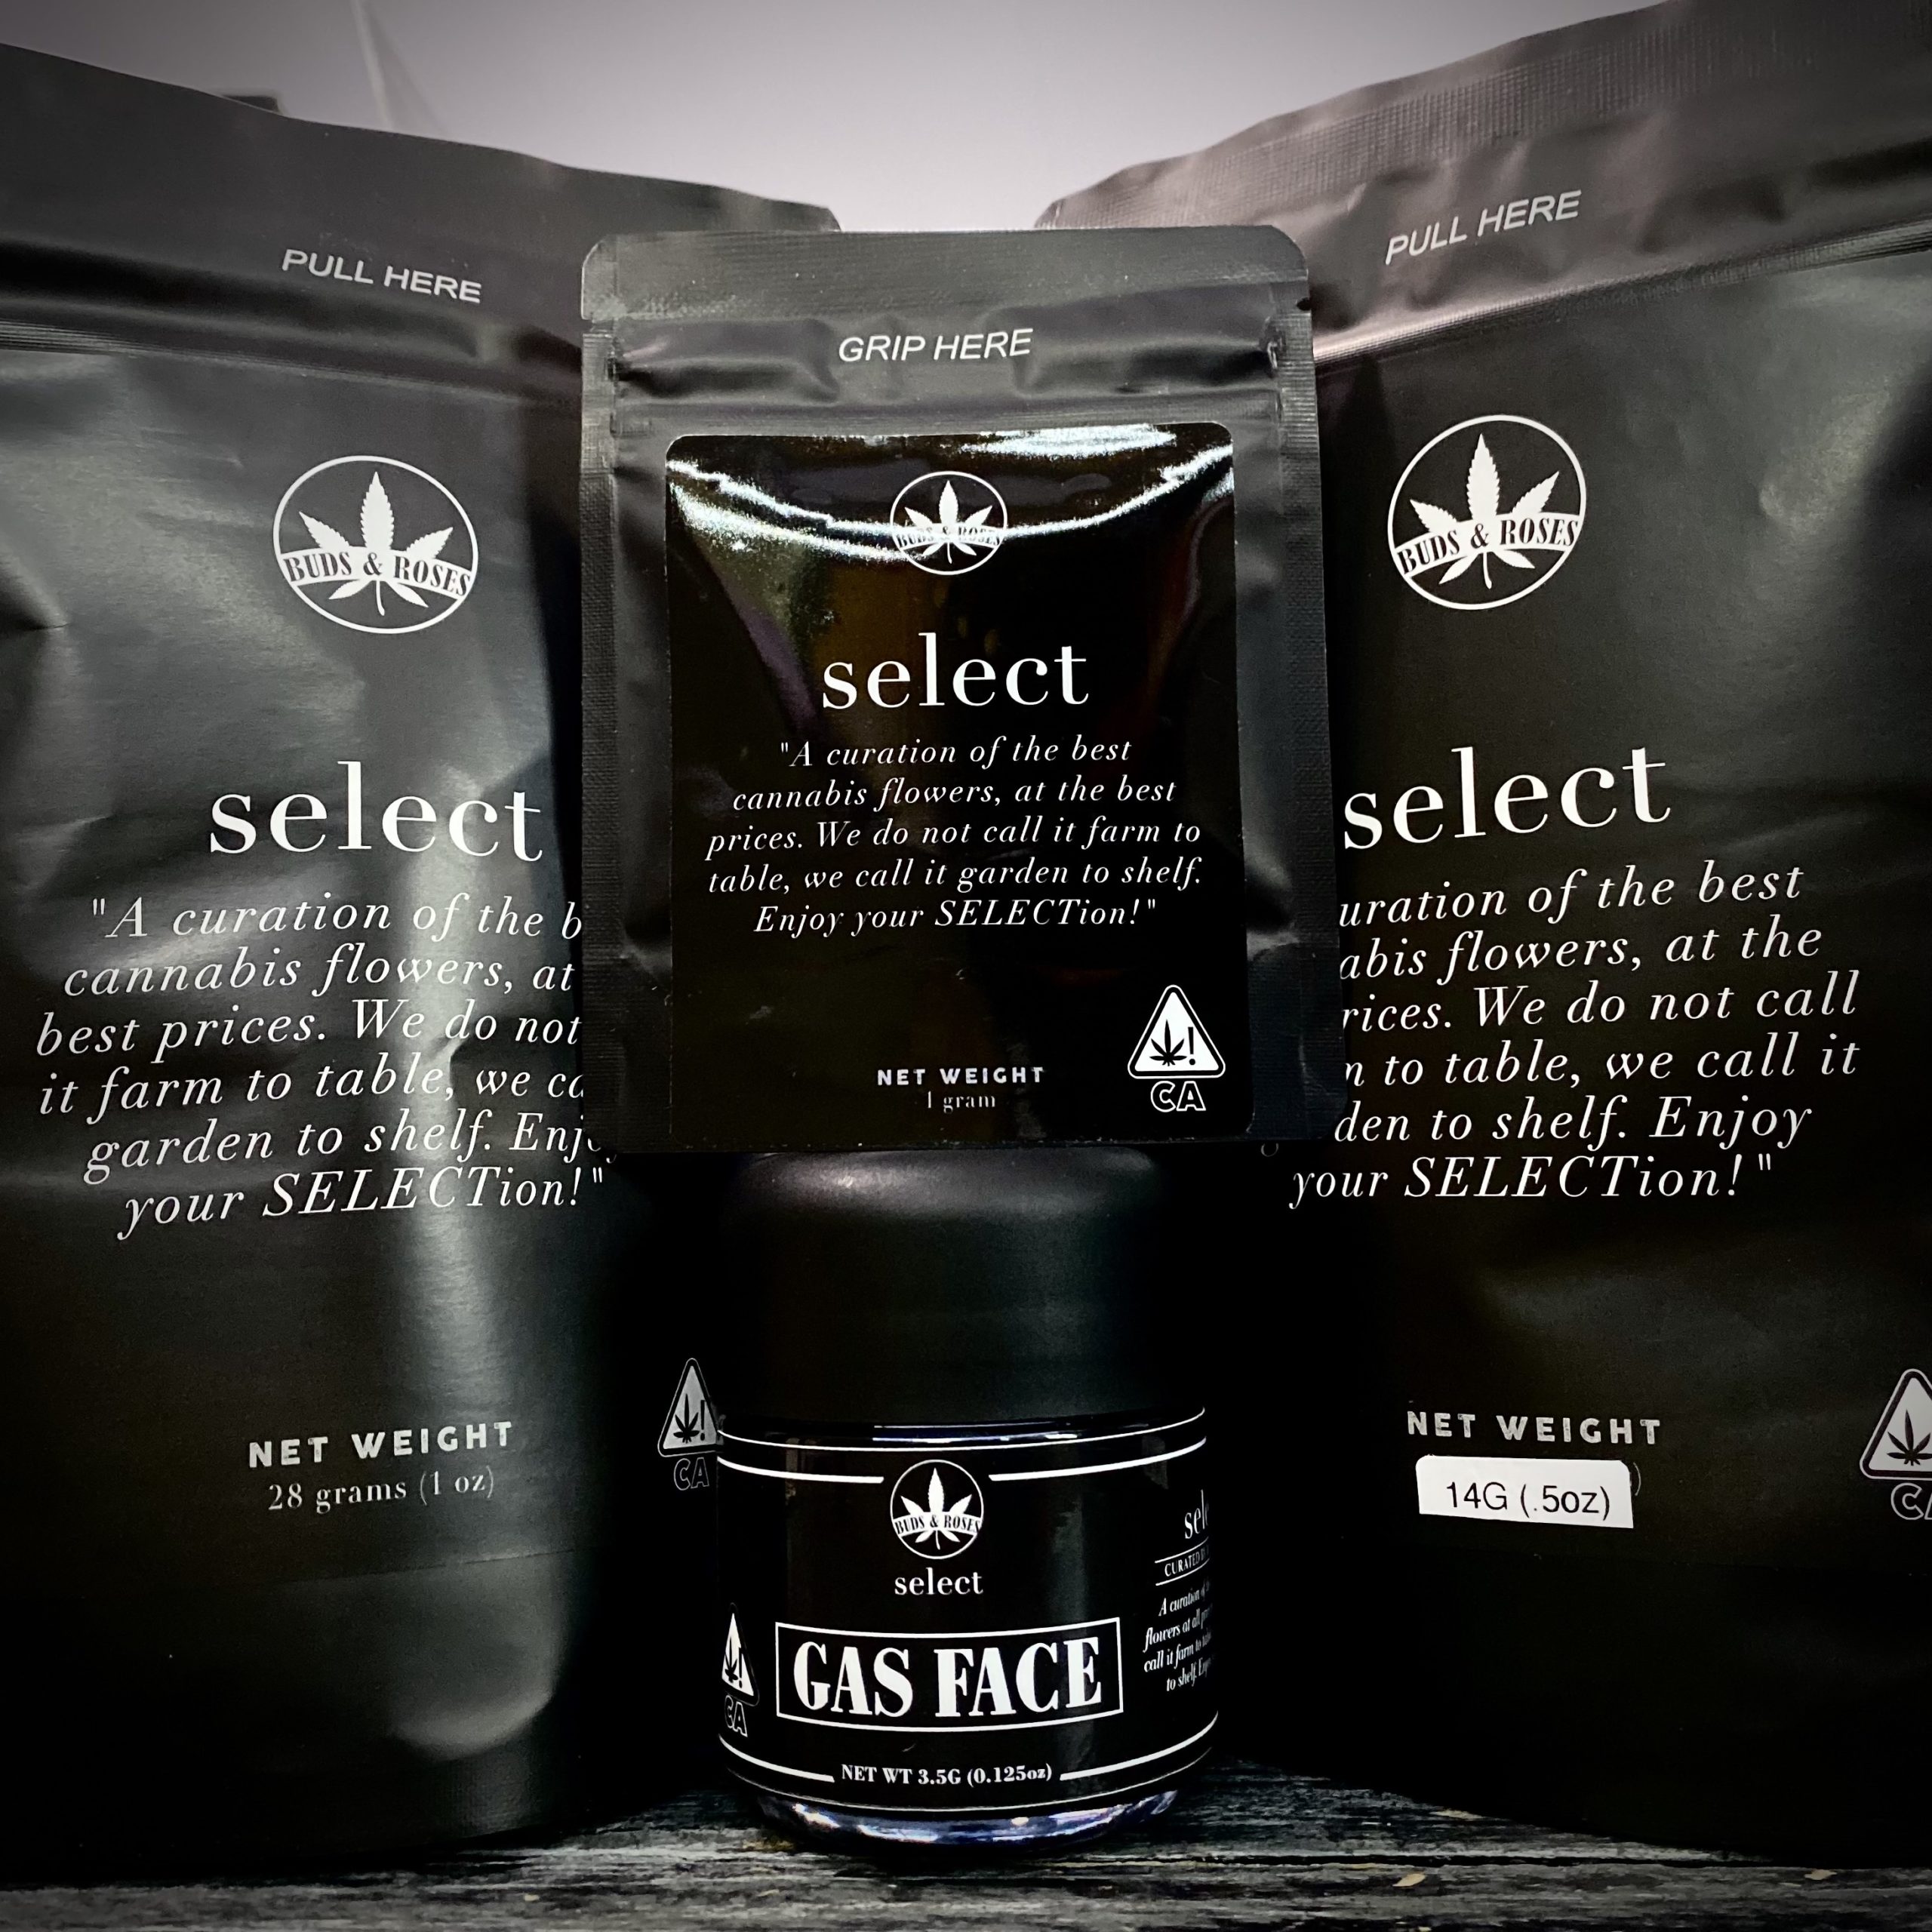 picture of Buds & Roses Select branded cannabis flower packaging